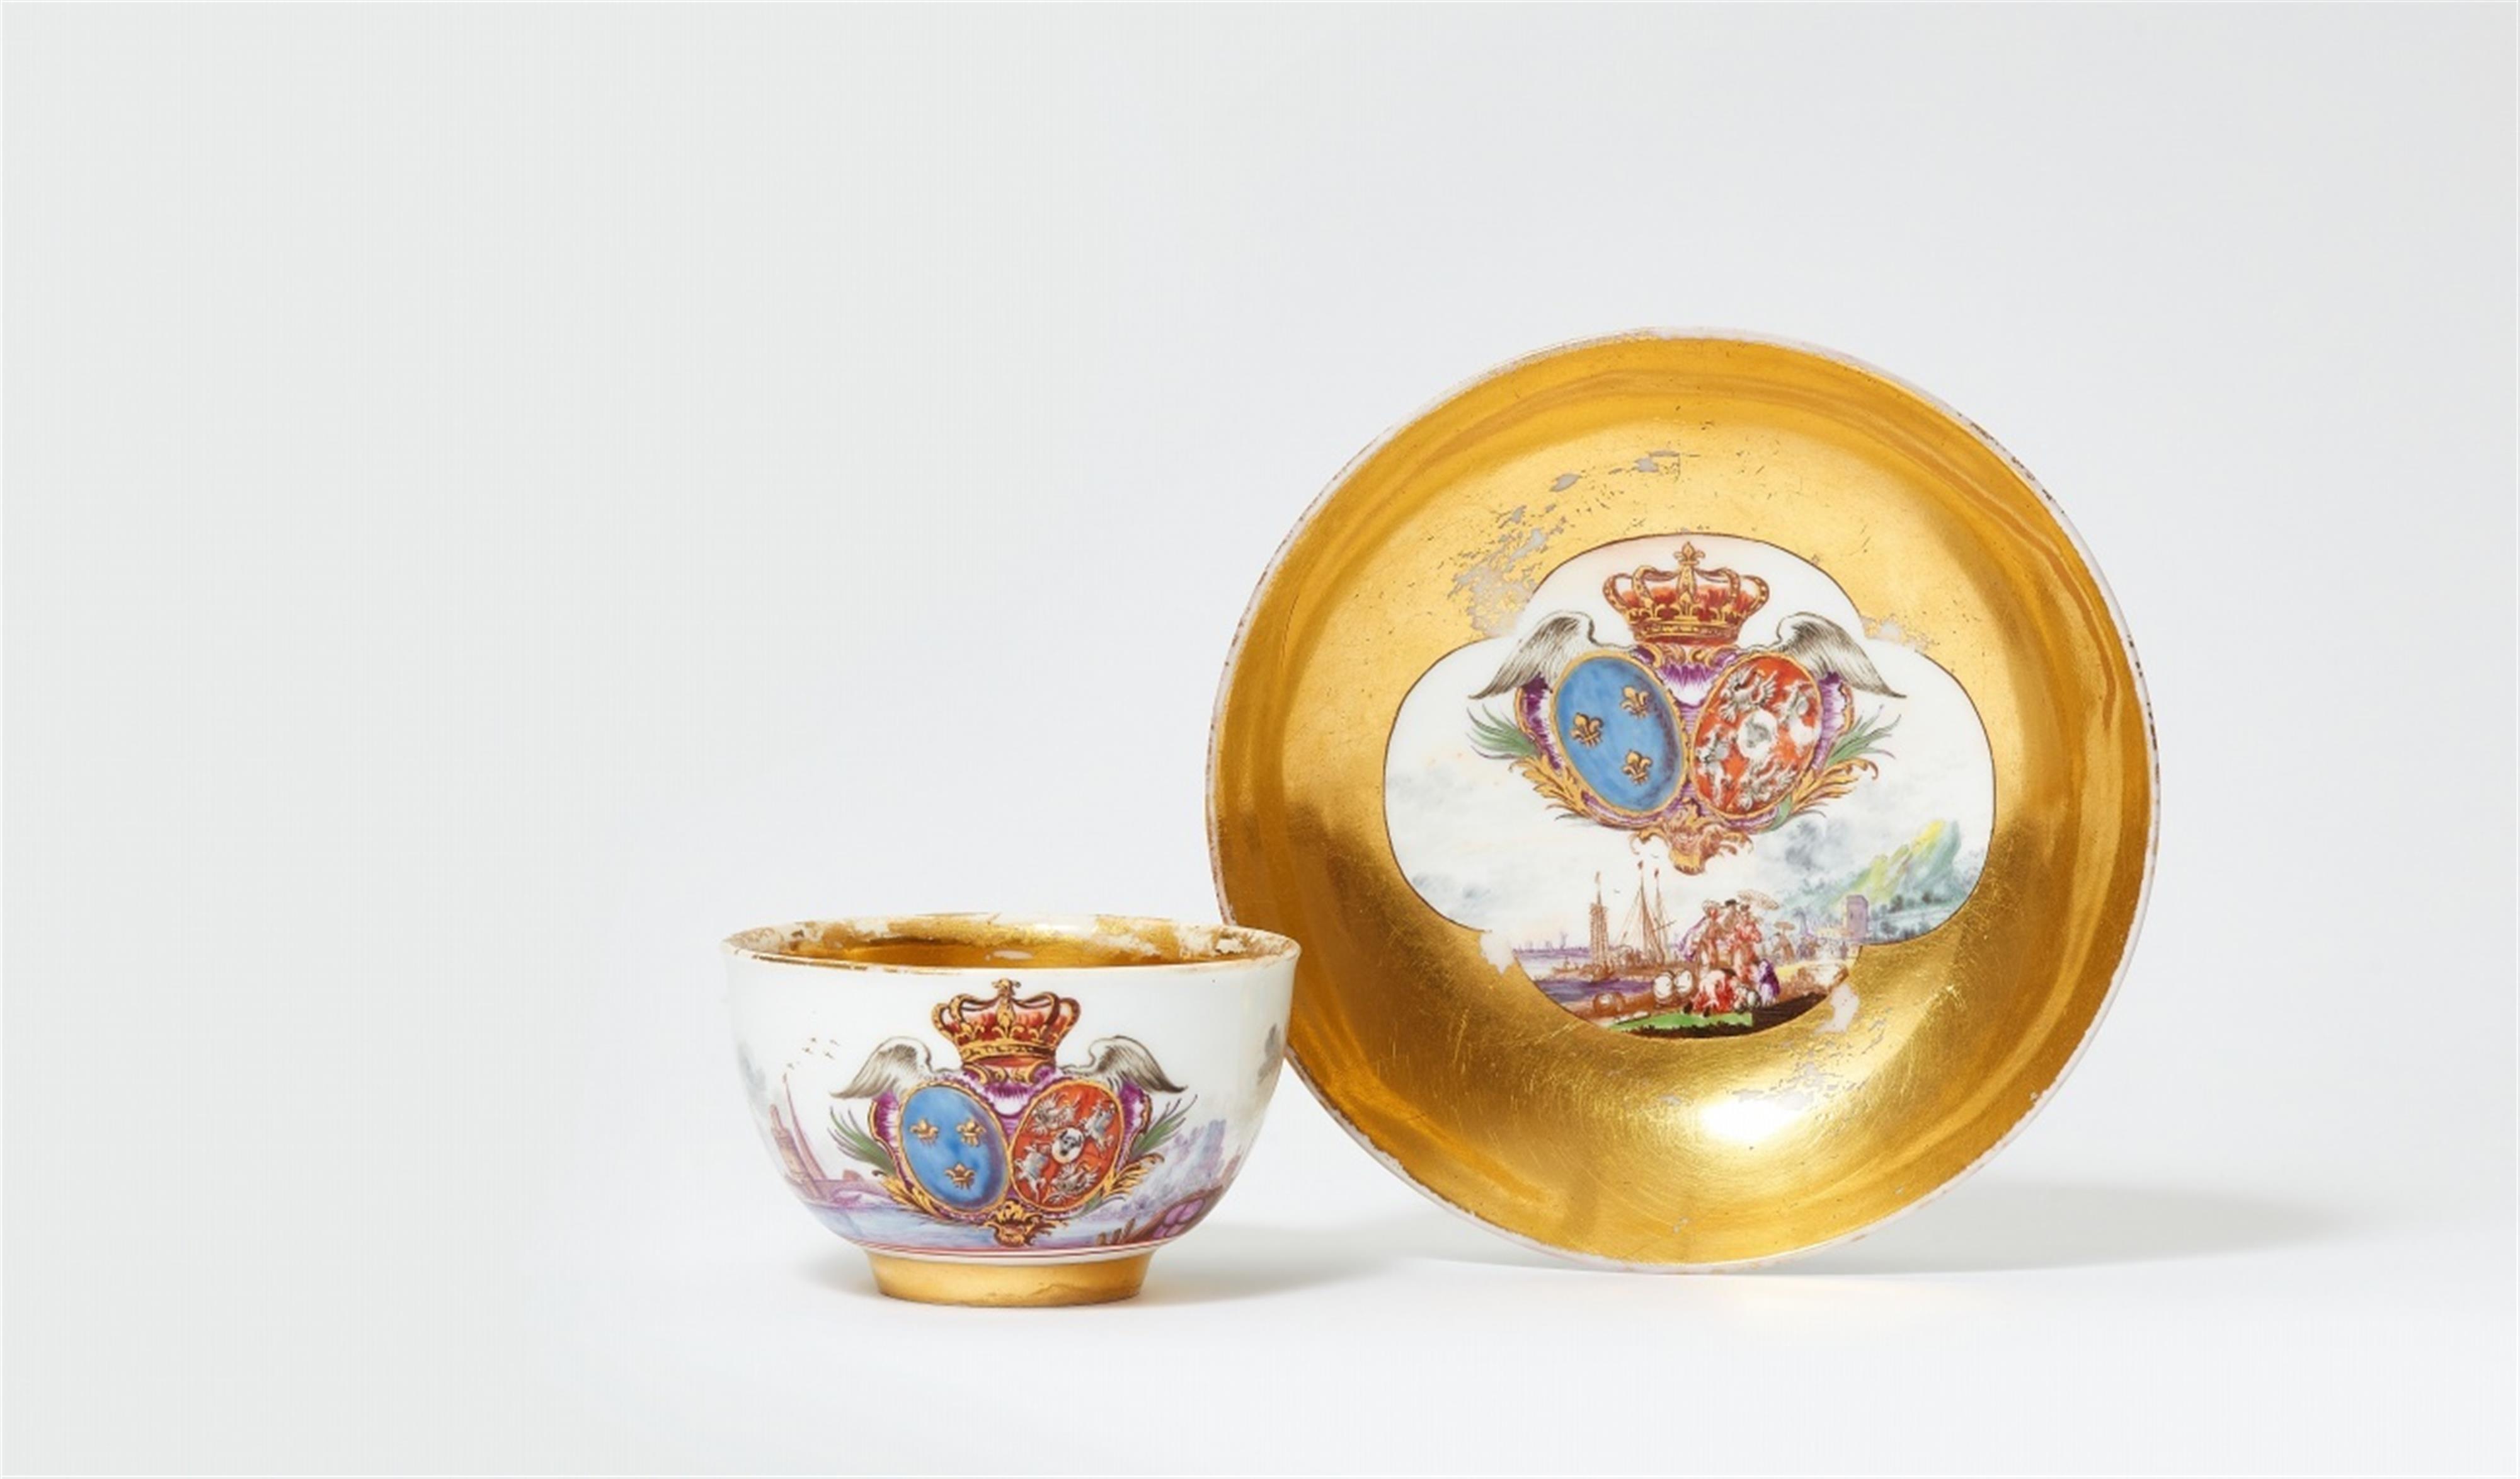 A Meissen porcelain tea bowl and saucer from the service for King Louis XV and Maria Leszczynska - image-1